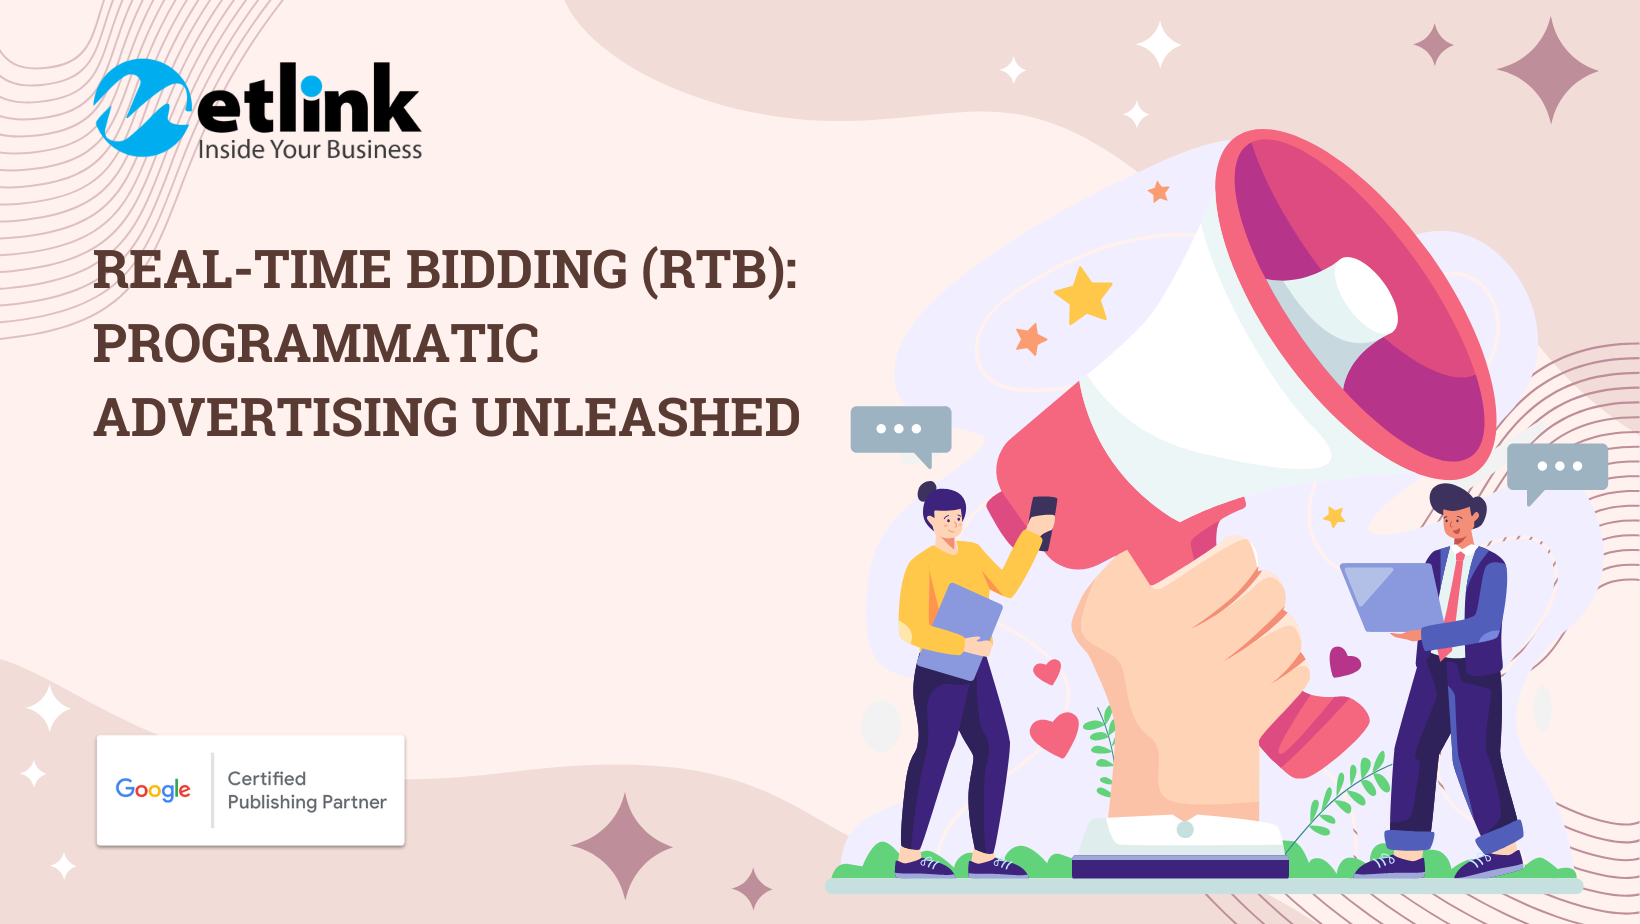 Real-Time Bidding (RTB): Programmatic Advertising Unleashed